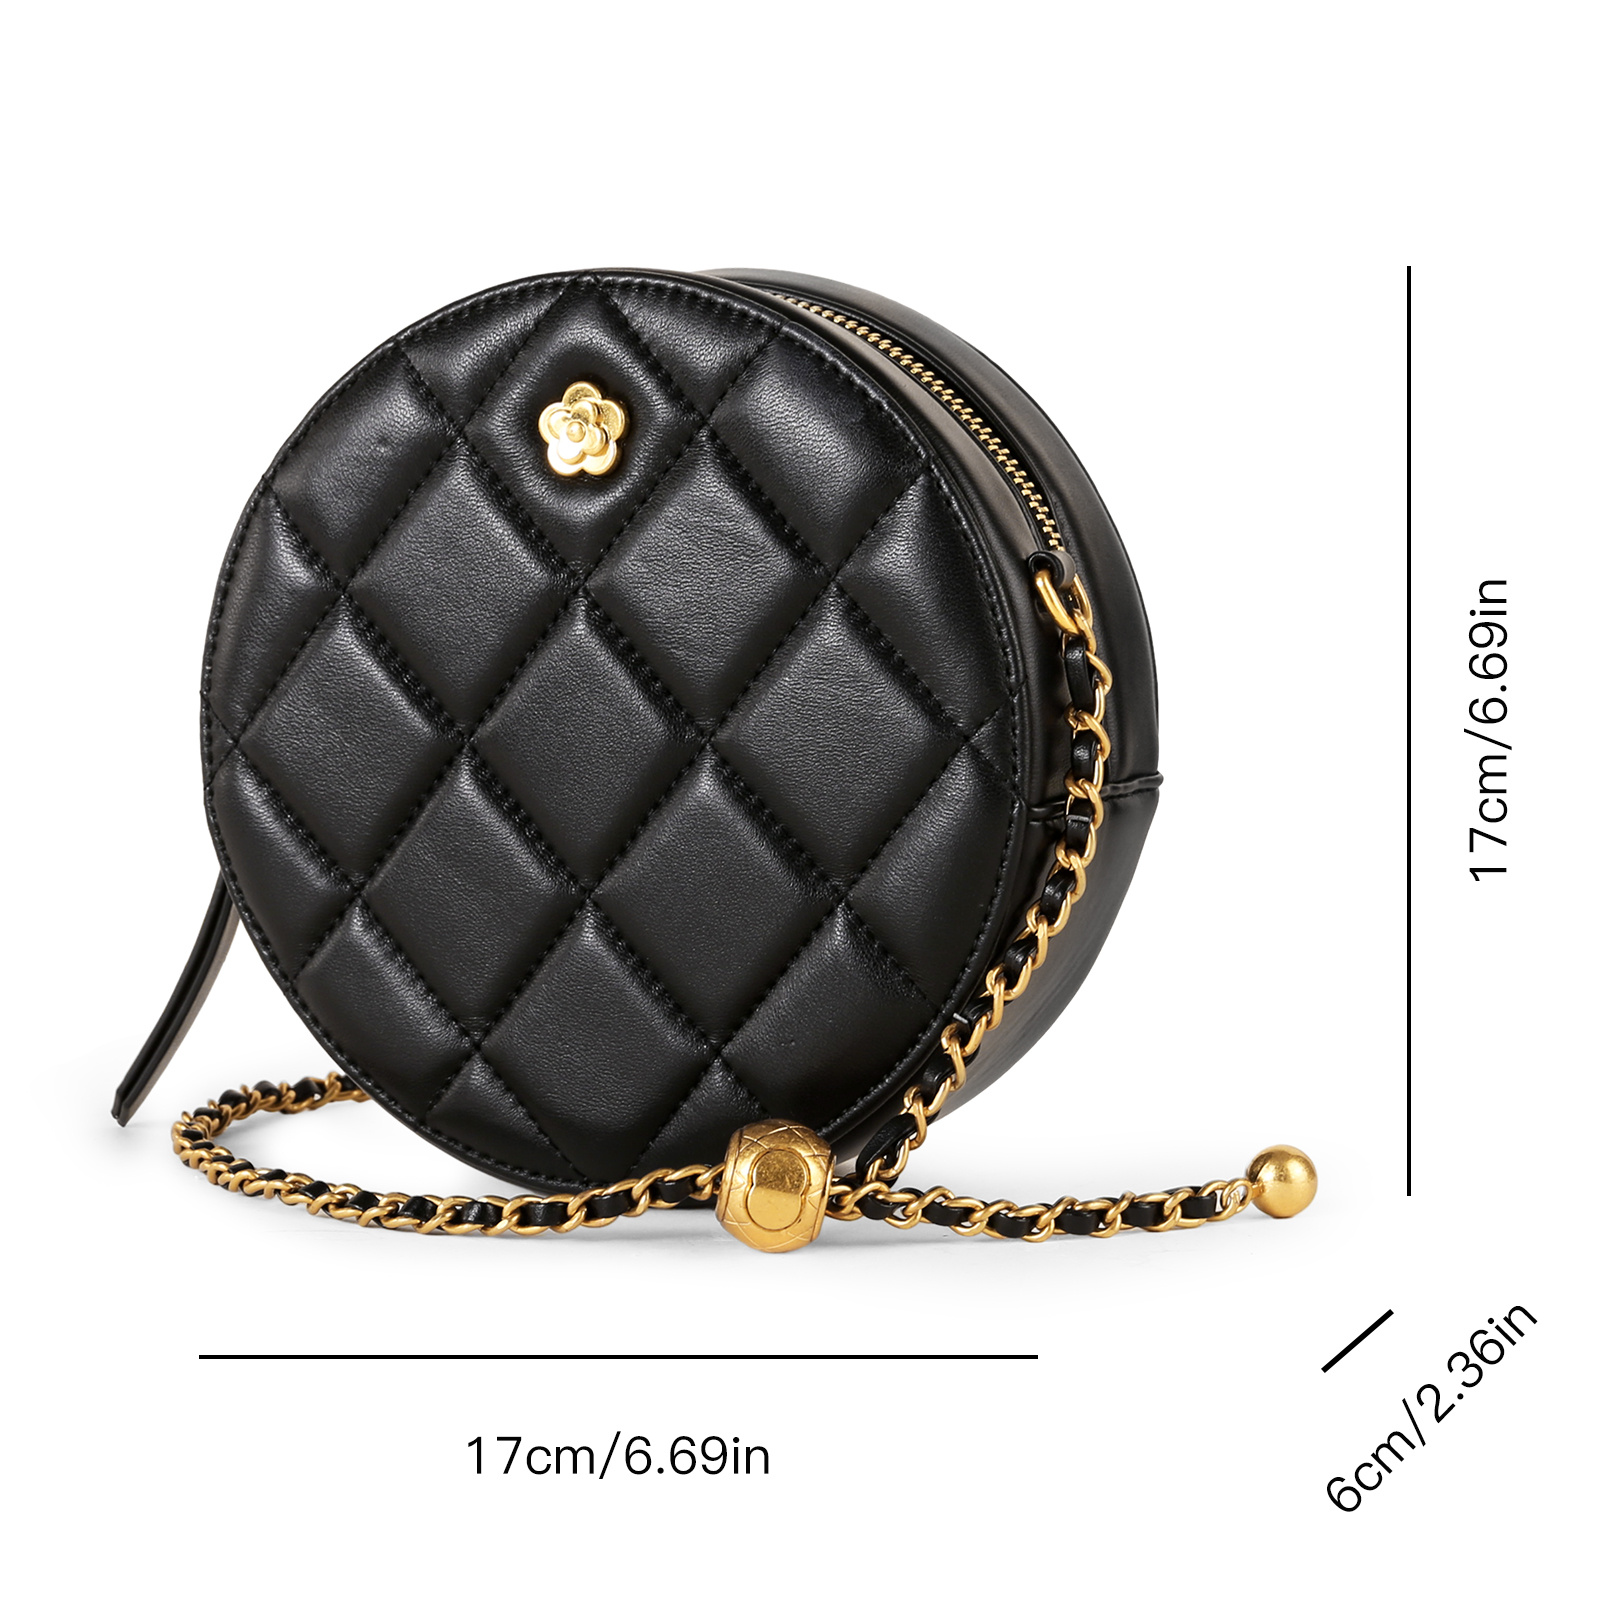 TOUTOU Mini Leather Round Purse For Women, Fashion Quilted Crossbody Bag,  Shoulder Bag With Adjustable Small Golden Bead Chain Strap